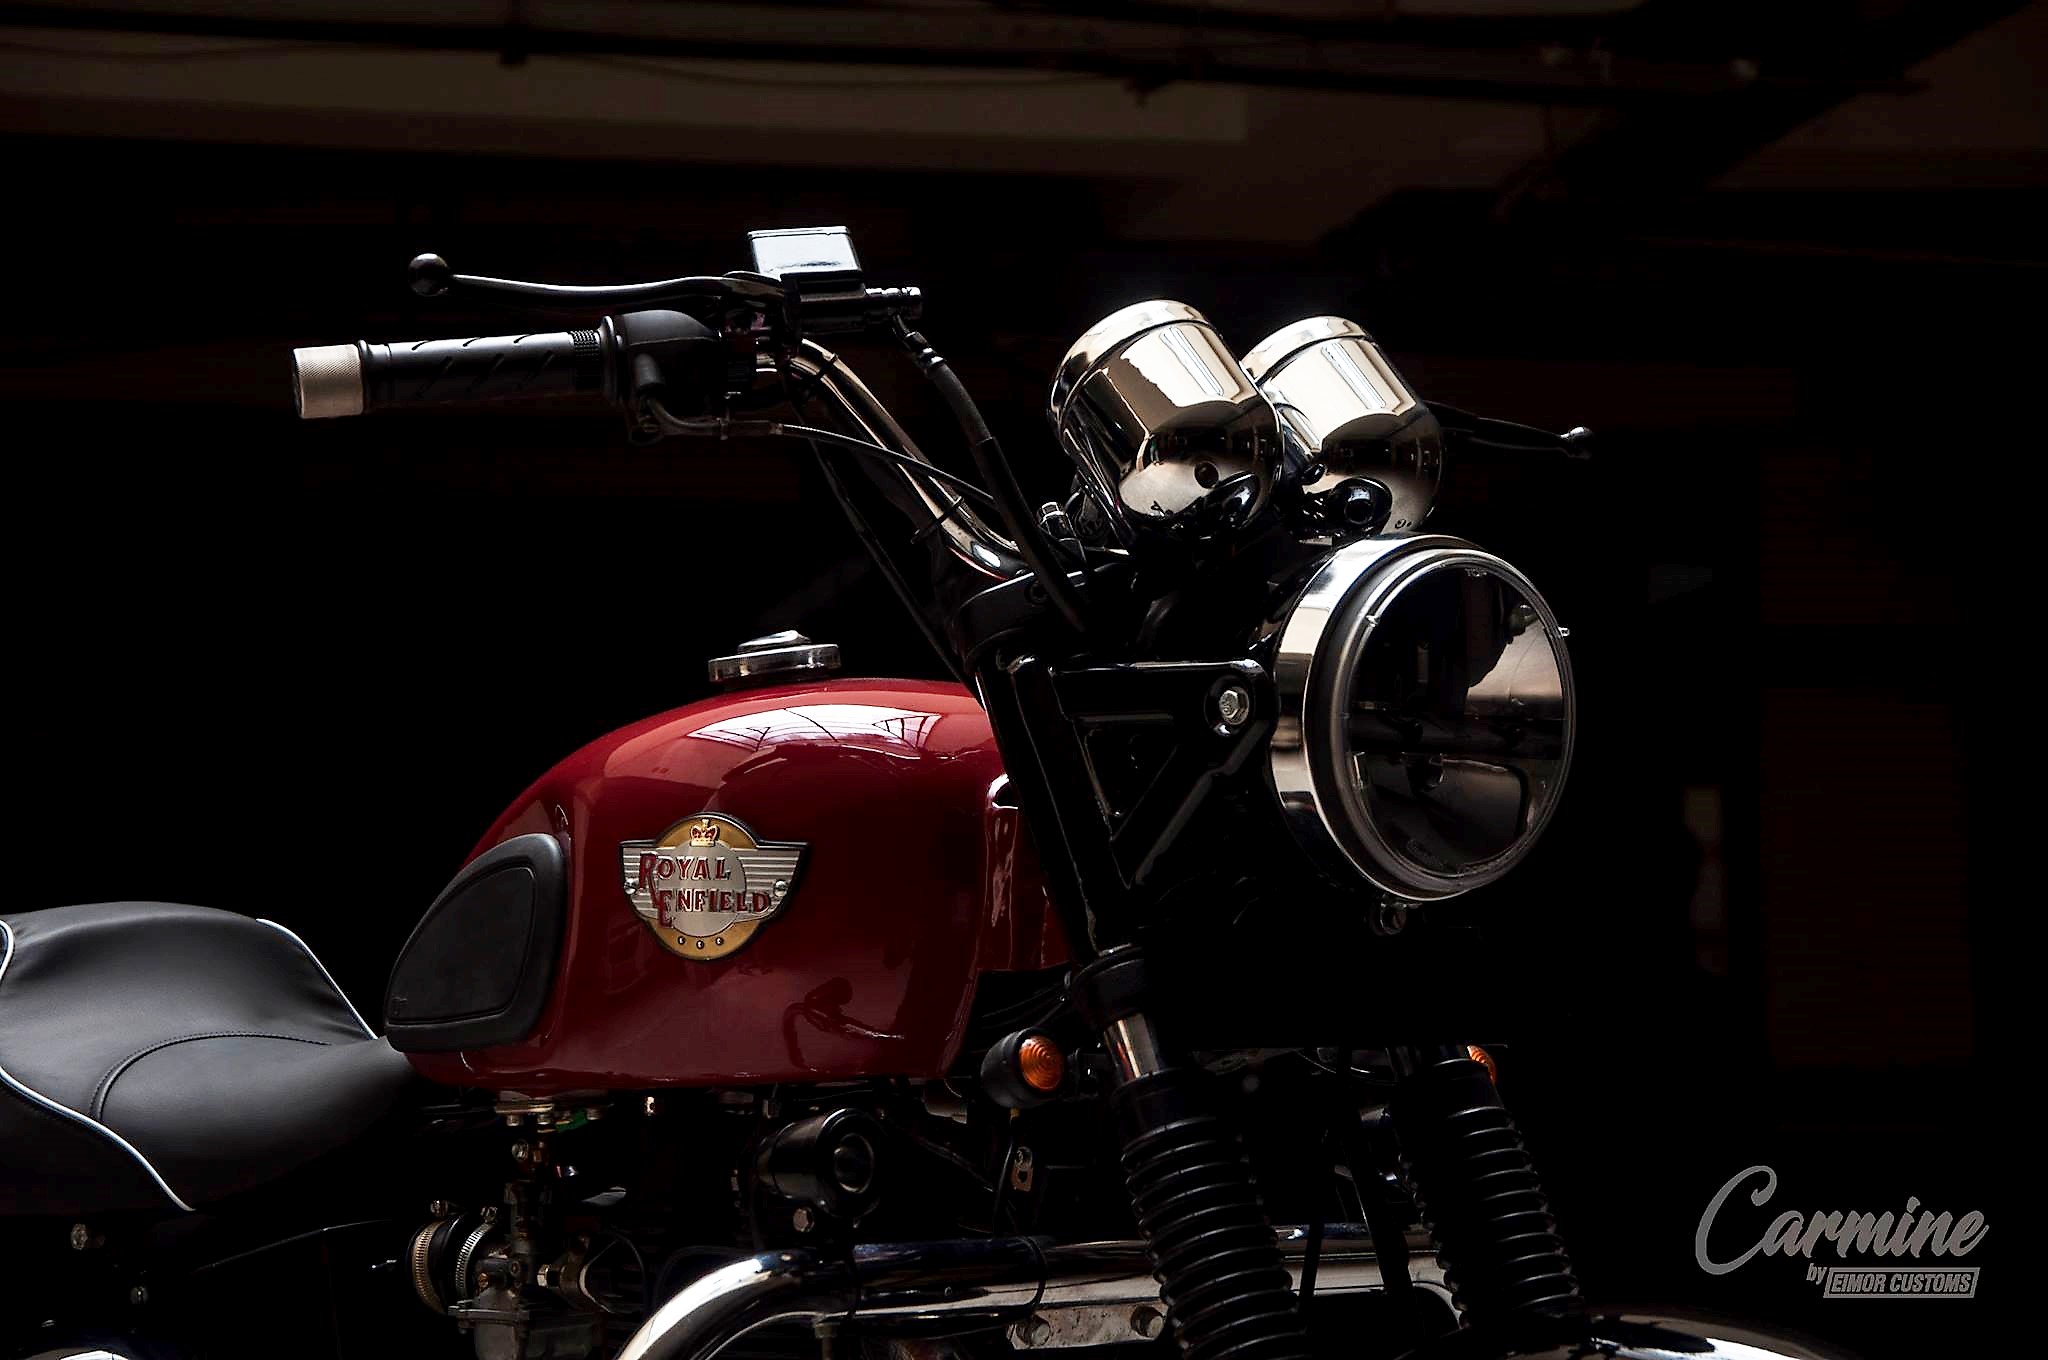 Meet Royal Enfield Carmine 350 Equipped with Premium Parts - background